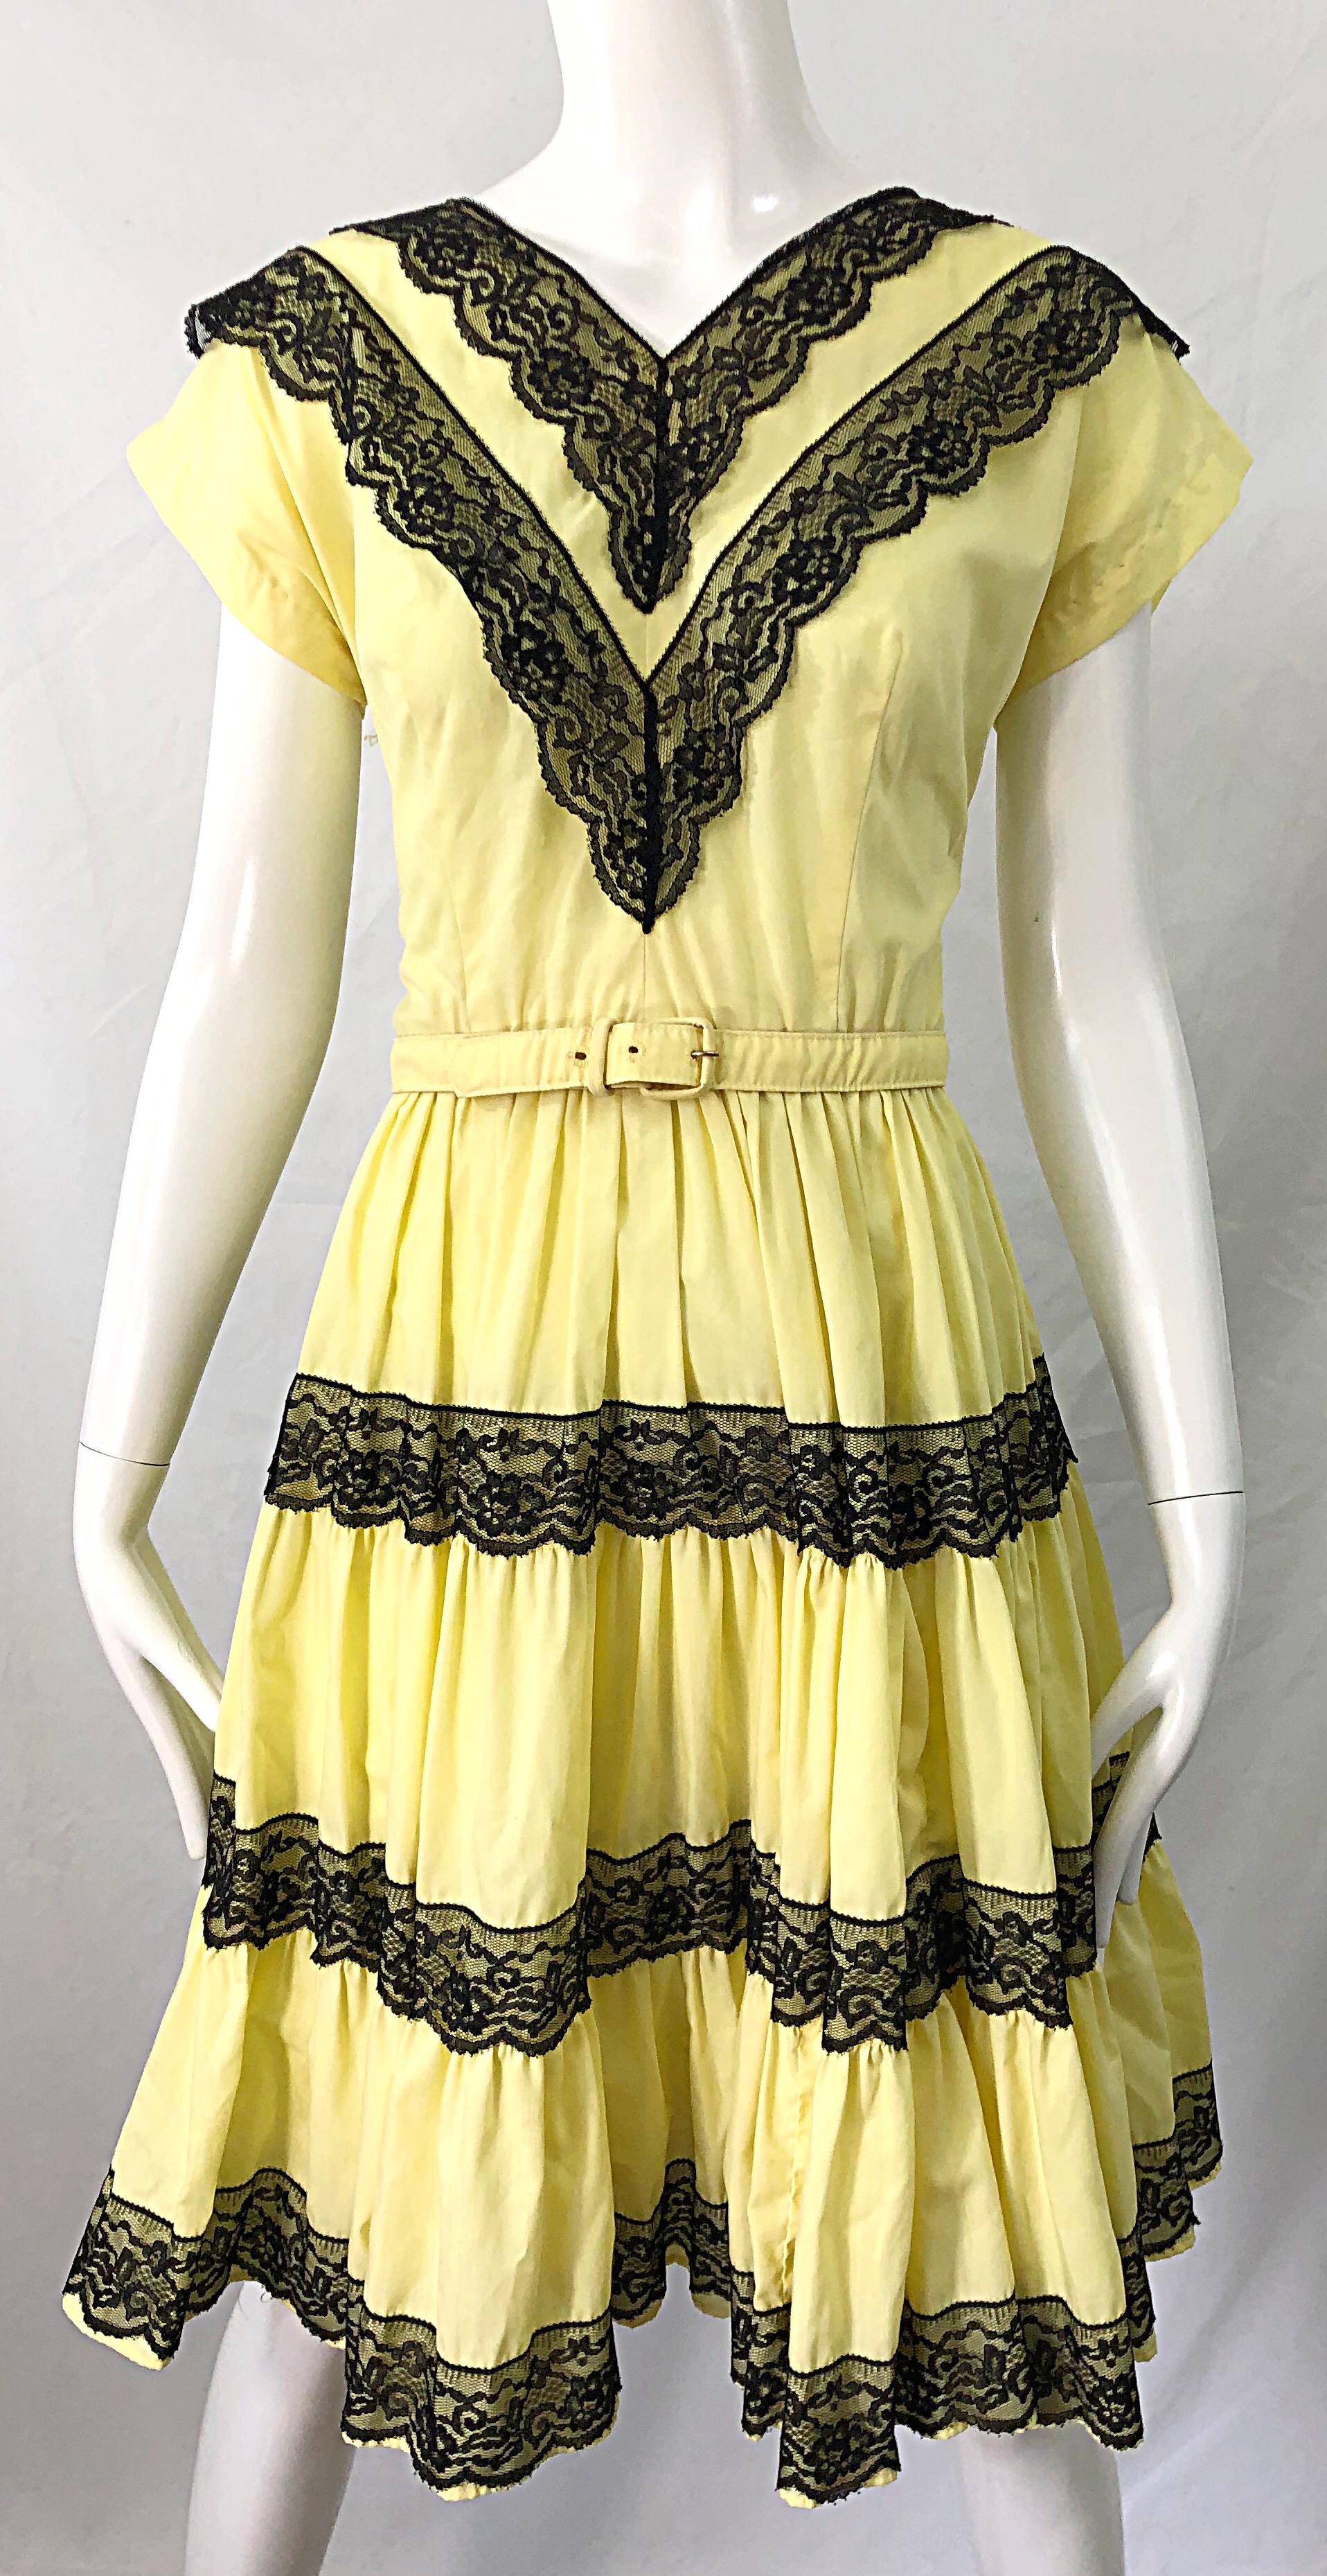 1950s Bettina of Miami Yellow + Black Cotton Lace Fit n' Flare Vintage 50s Dress For Sale 3